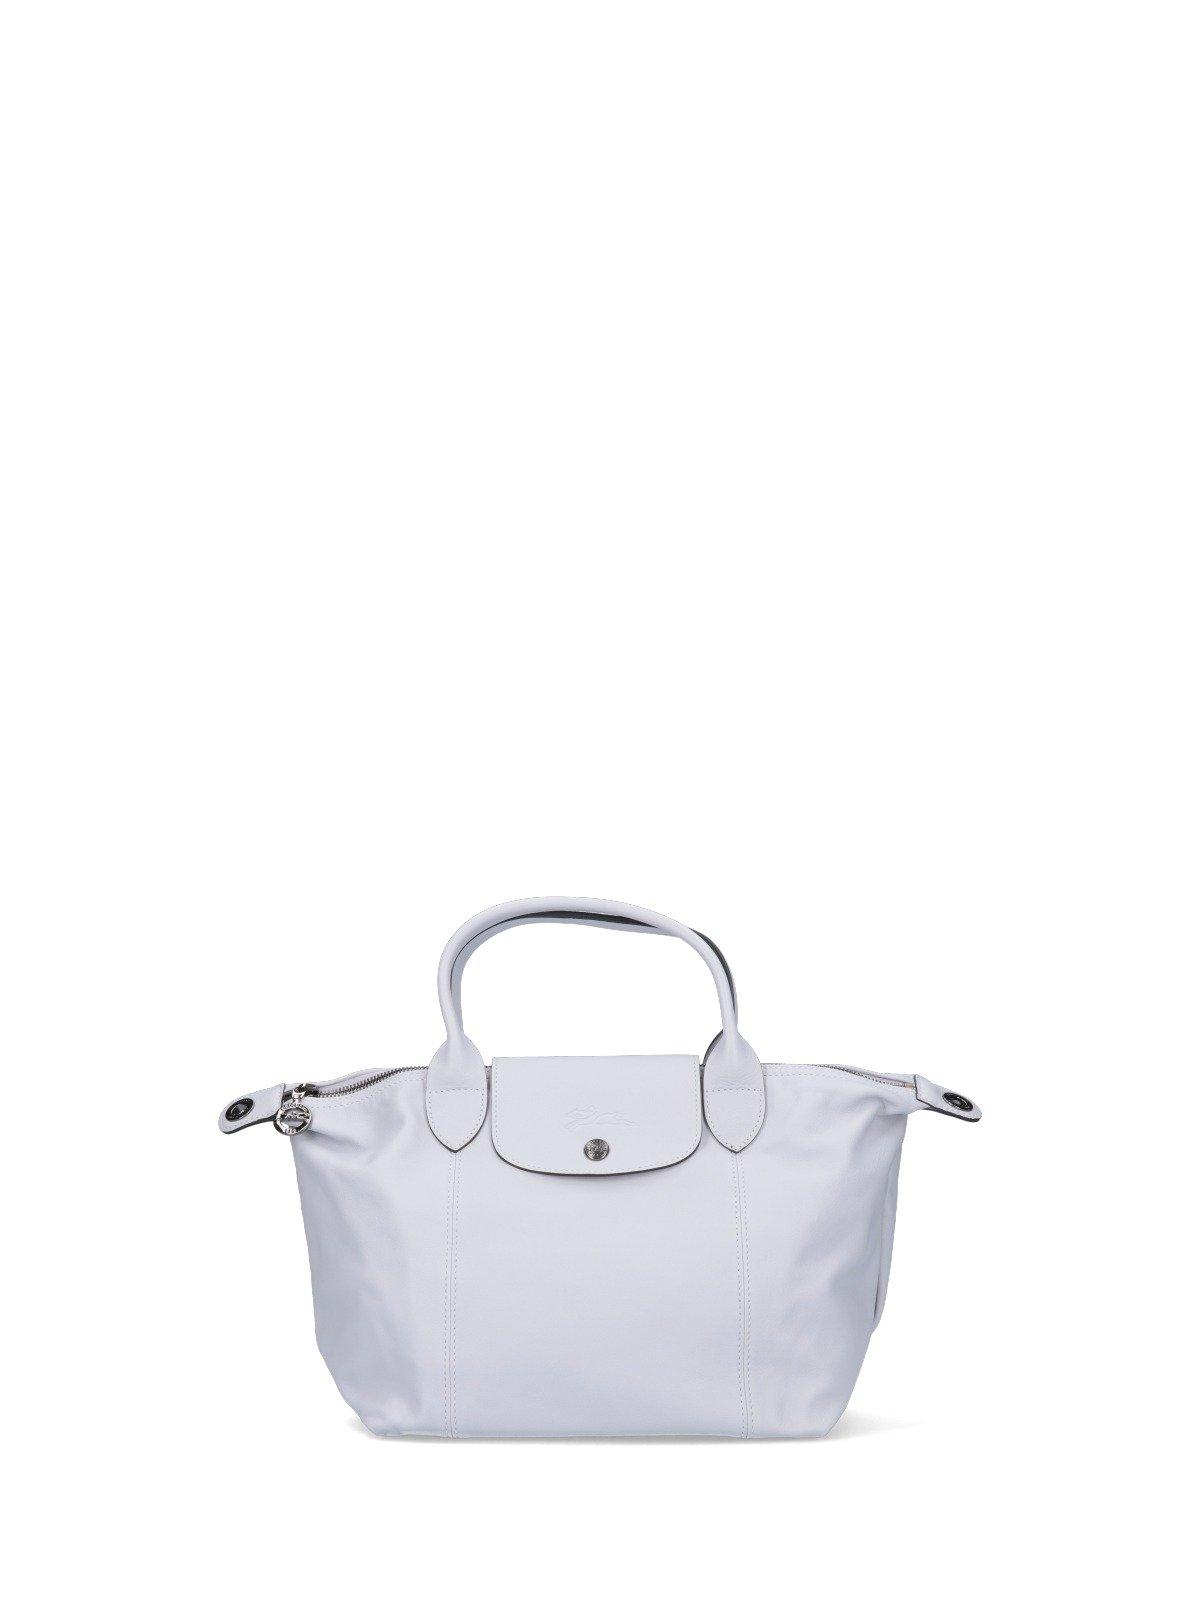 Longchamp Leather Le Pliage Cuir Top Handle Bag in Grey,Silver Tone (Gray)  - Save 56% - Lyst